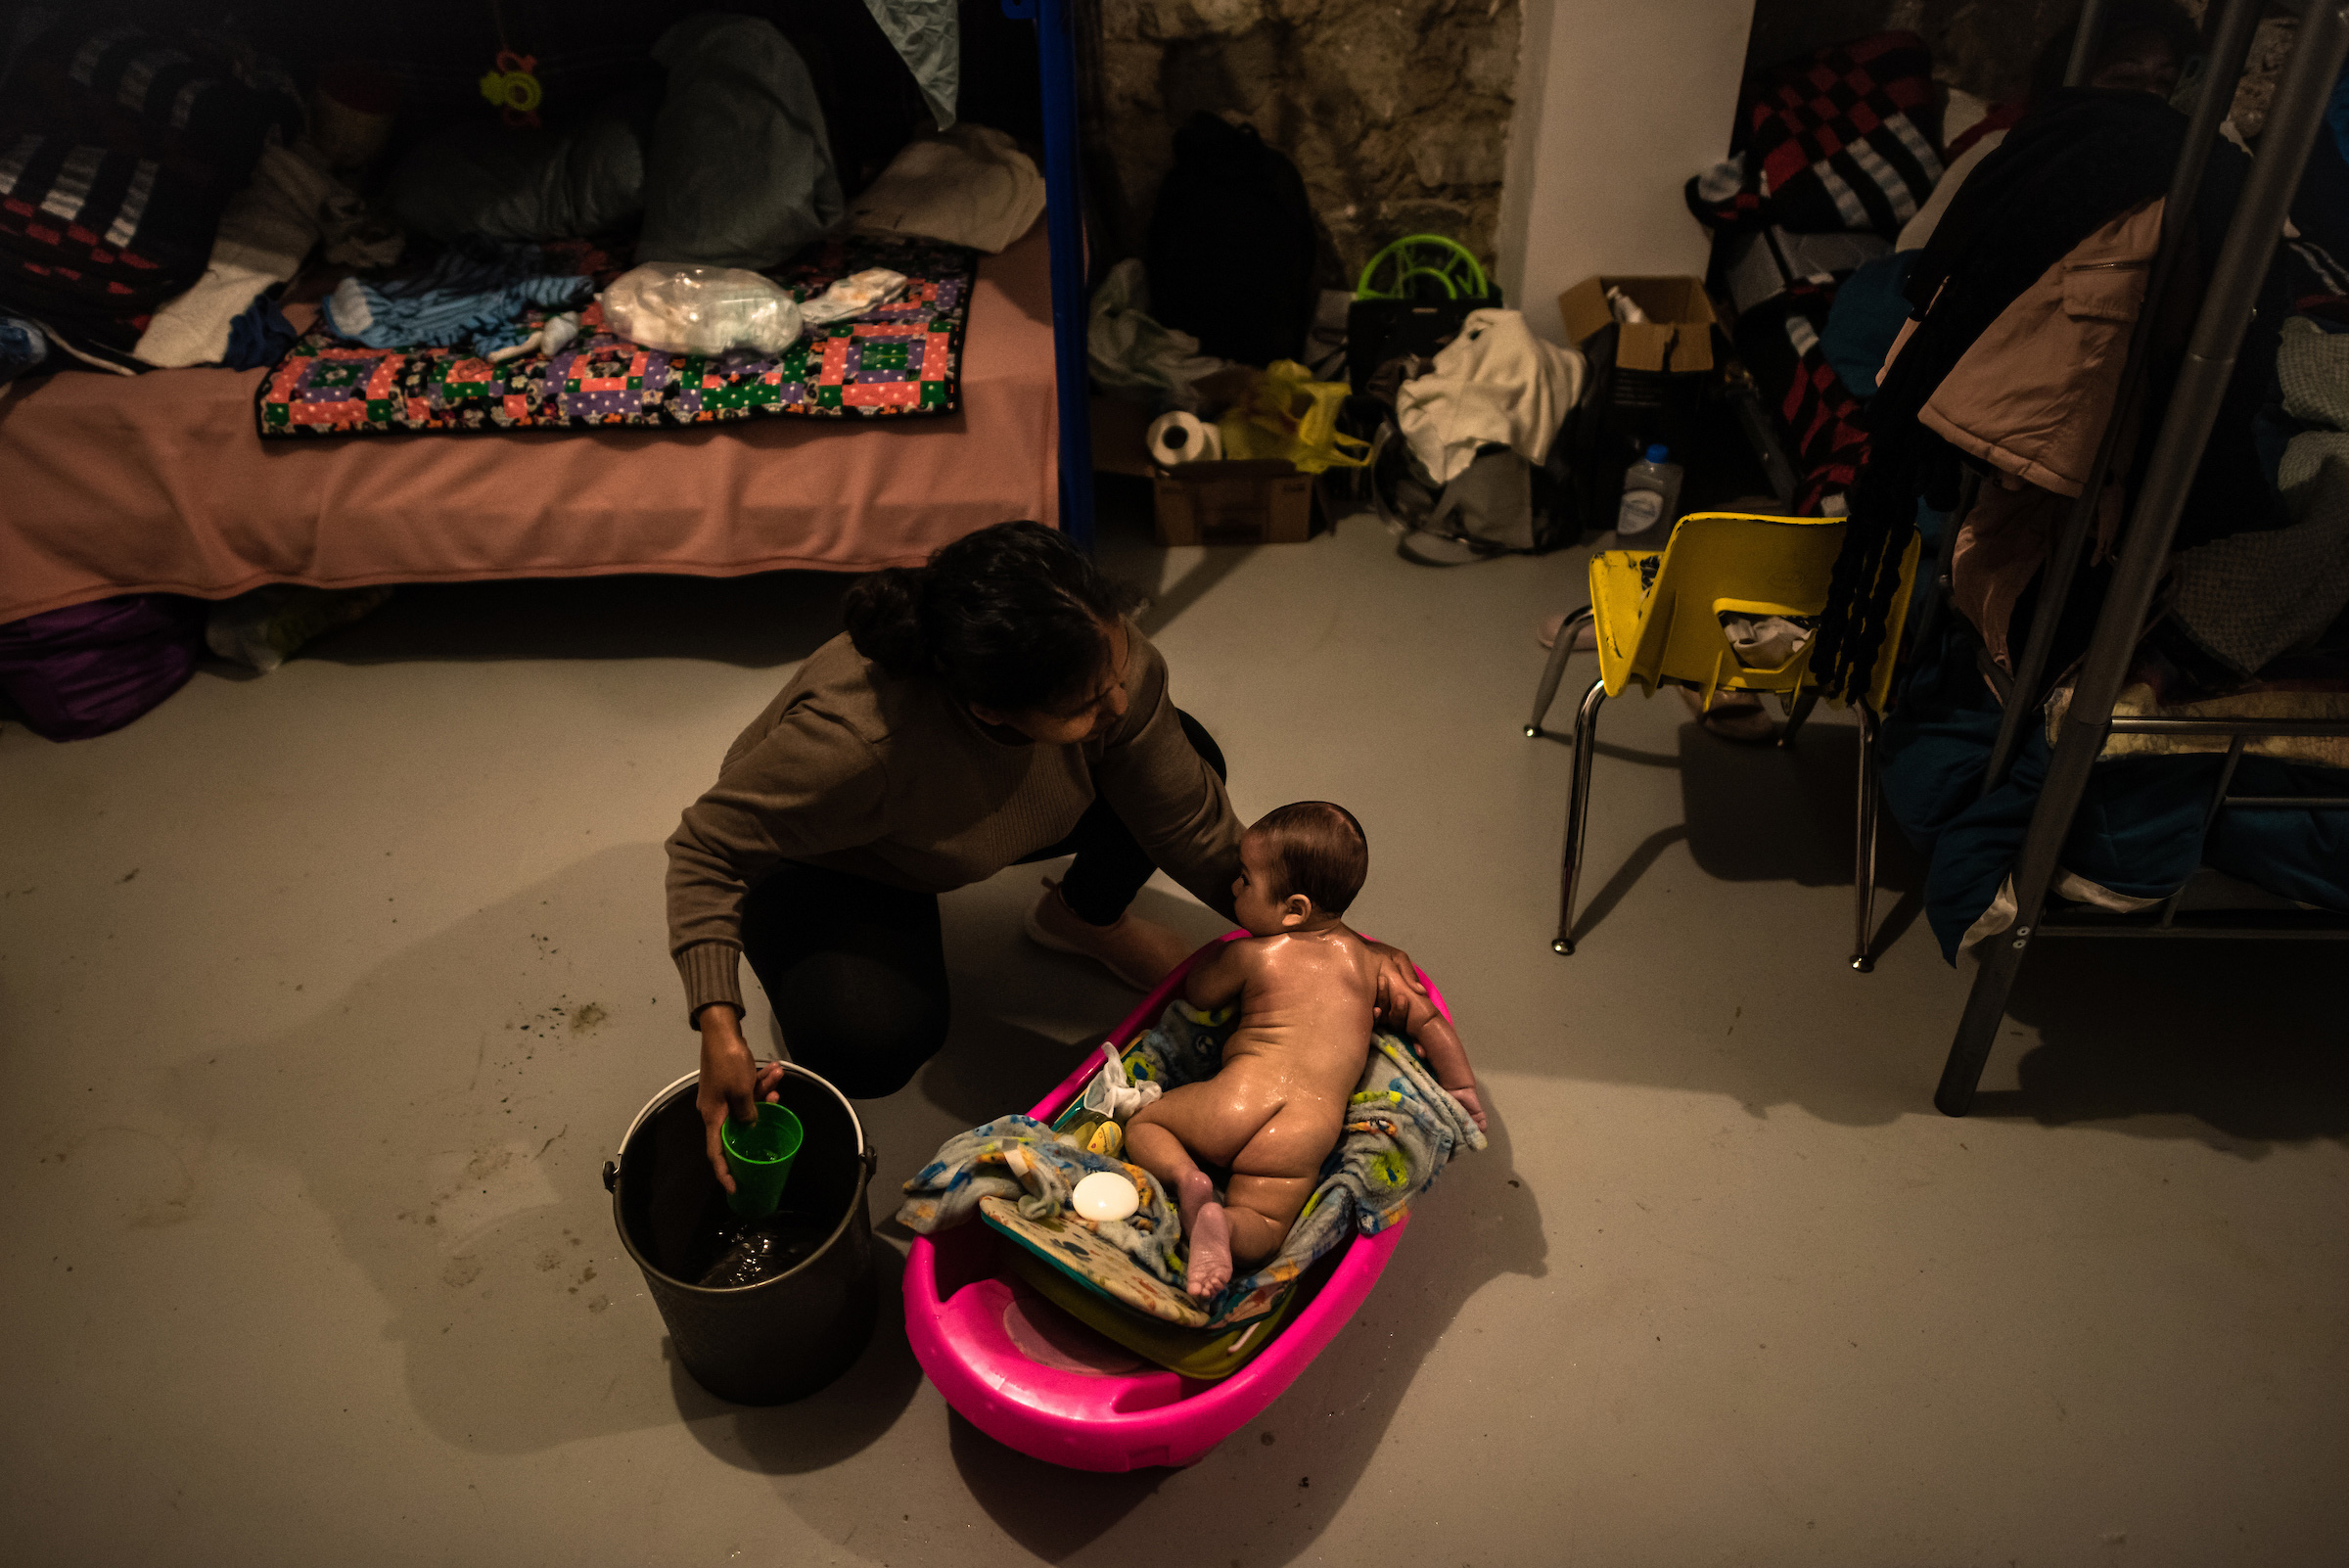 A mother from El Salvador bathes her baby. (Meridith Kohut for TIME)